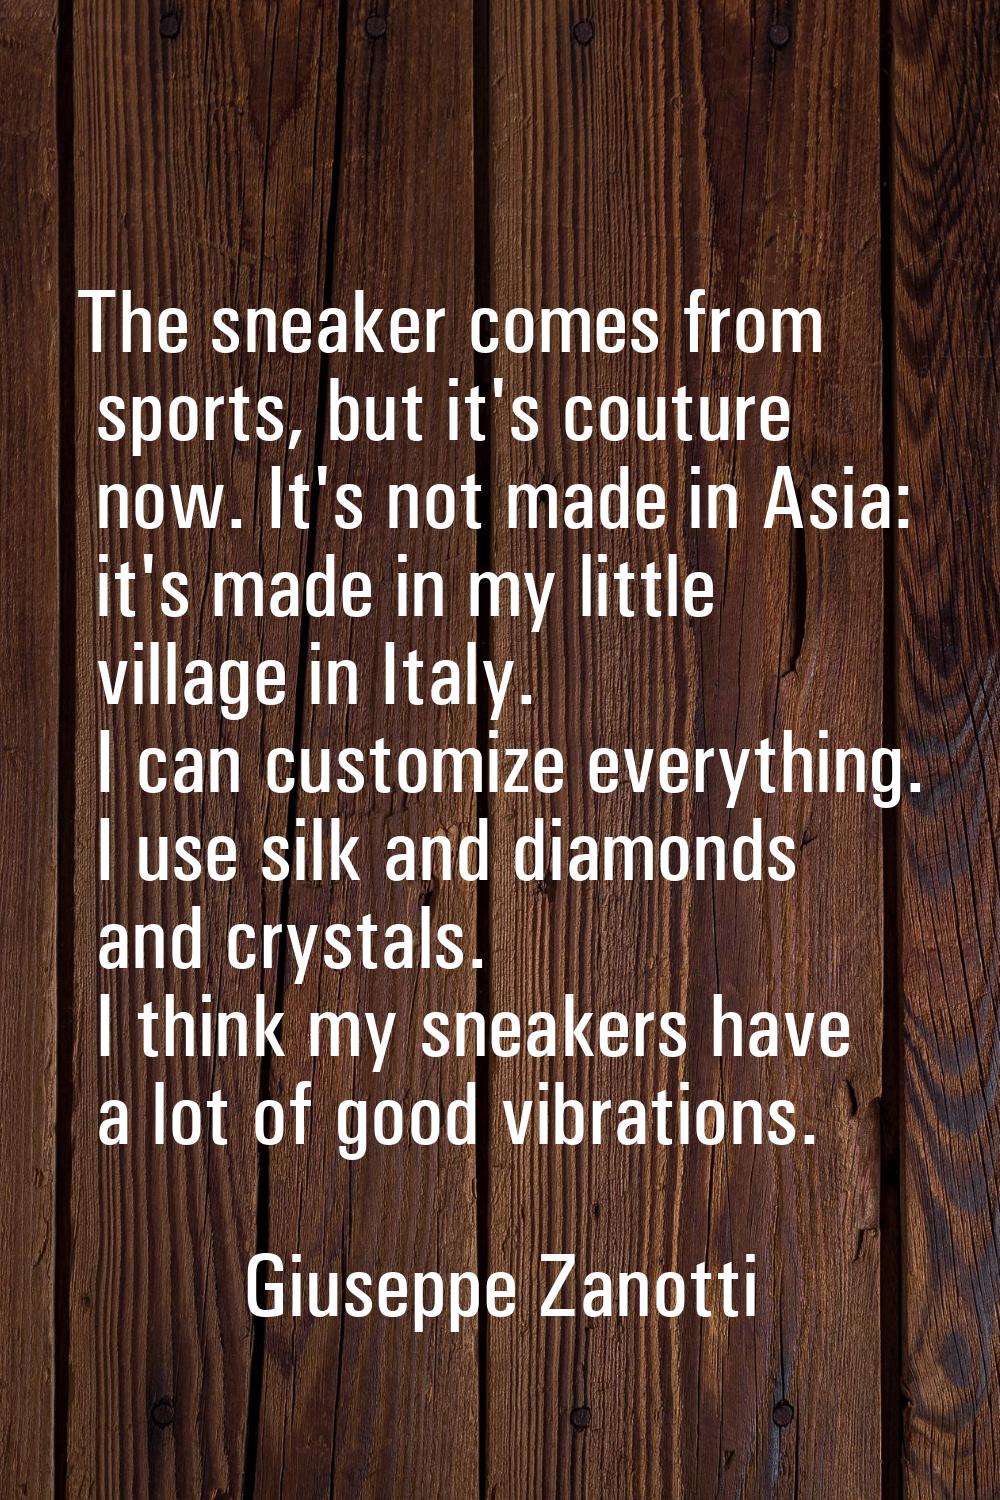 The sneaker comes from sports, but it's couture now. It's not made in Asia: it's made in my little 